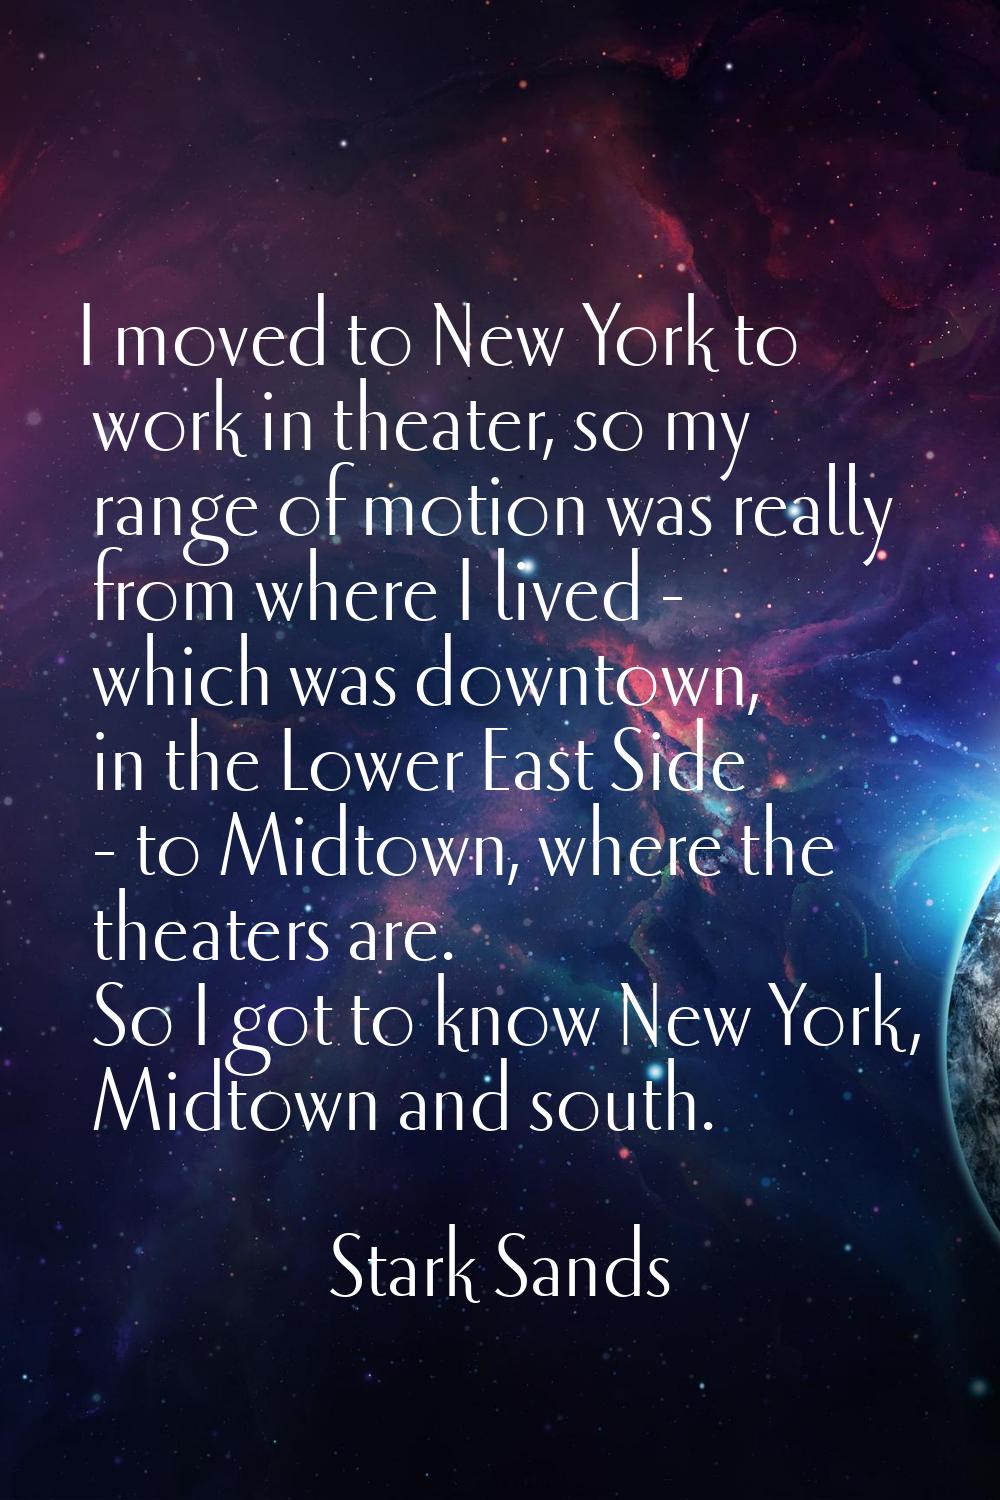 I moved to New York to work in theater, so my range of motion was really from where I lived - which